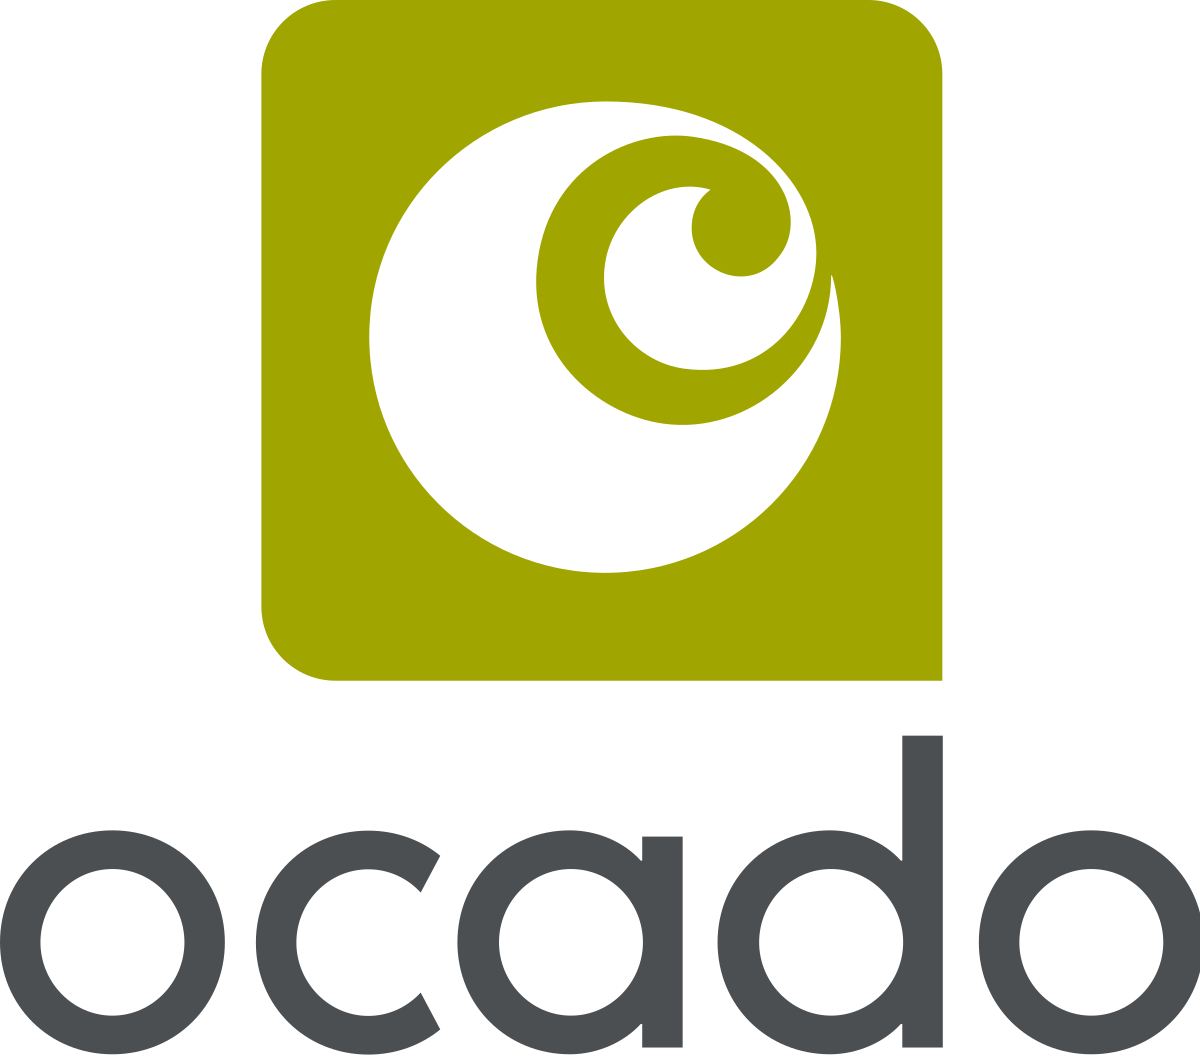 Grocery Store Starts with T Logo - Ocado